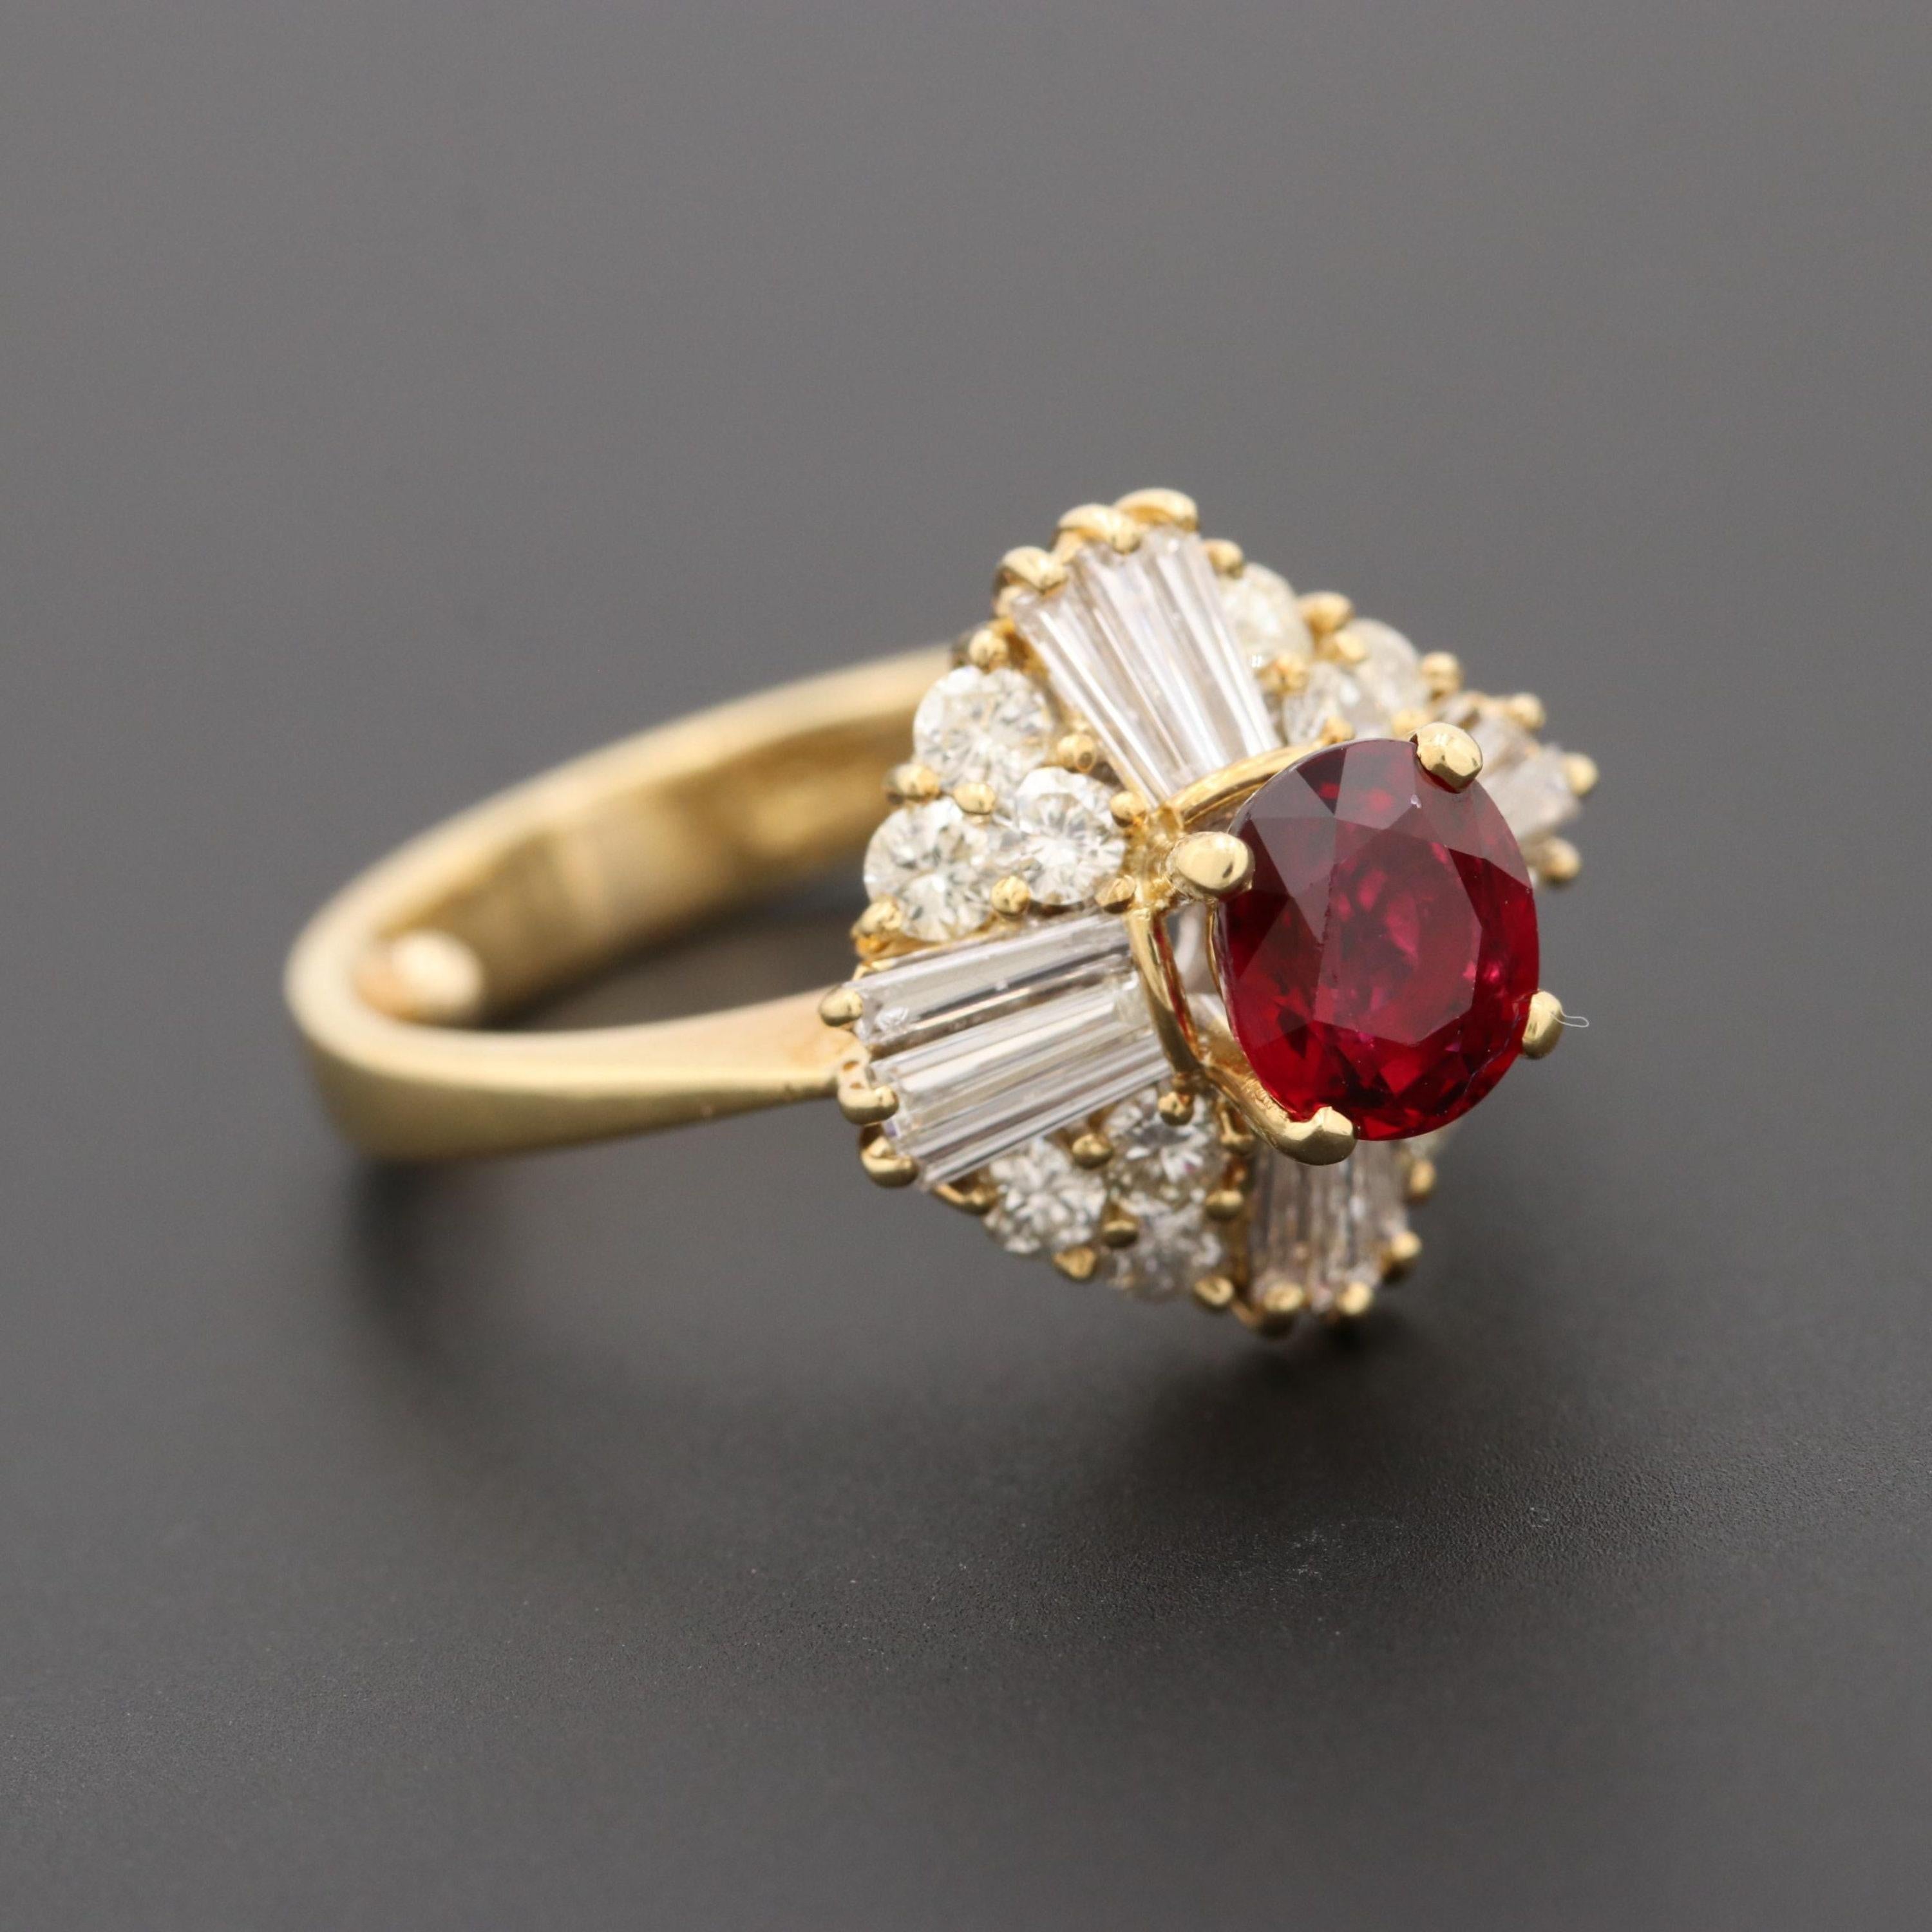 For Sale:  Floral Oval Cut Ruby Diamond Engagement Ring Victorian Ruby Diamond Wedding Ring 2